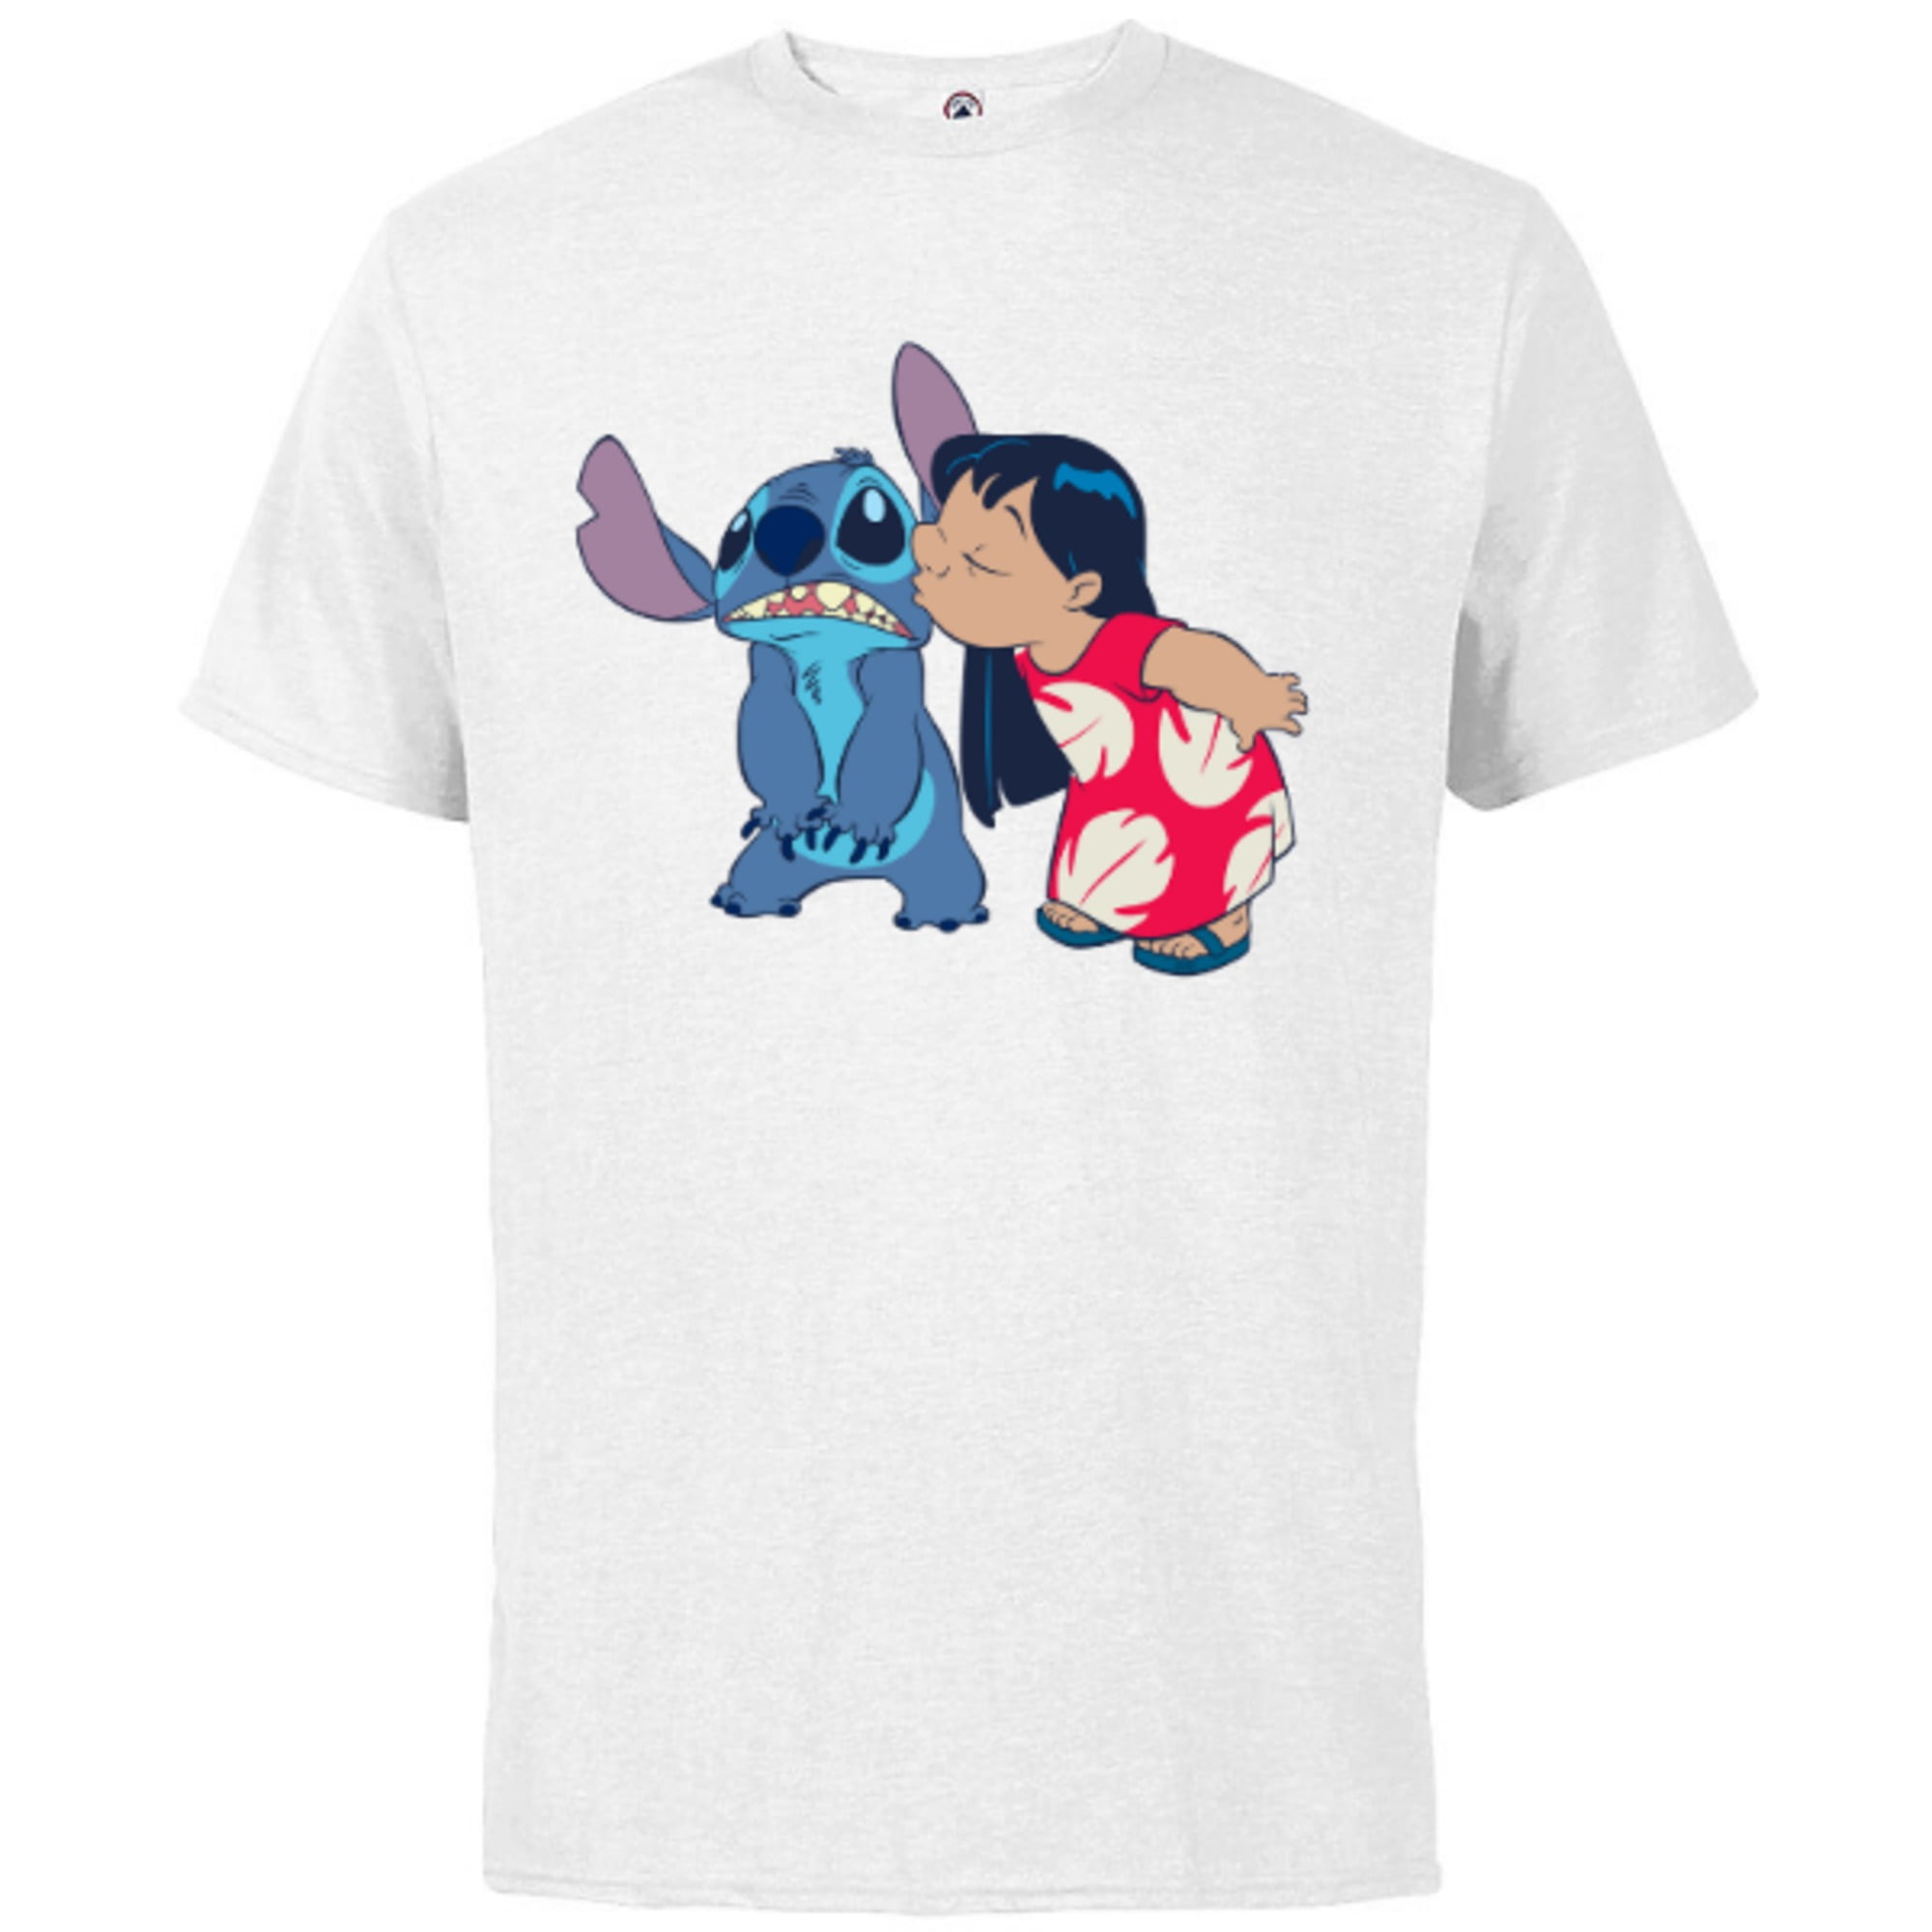 - Sleeve - Short Kisses Disney Funny and Stitch Adults Cotton Customized-White for Lilo T-Shirt